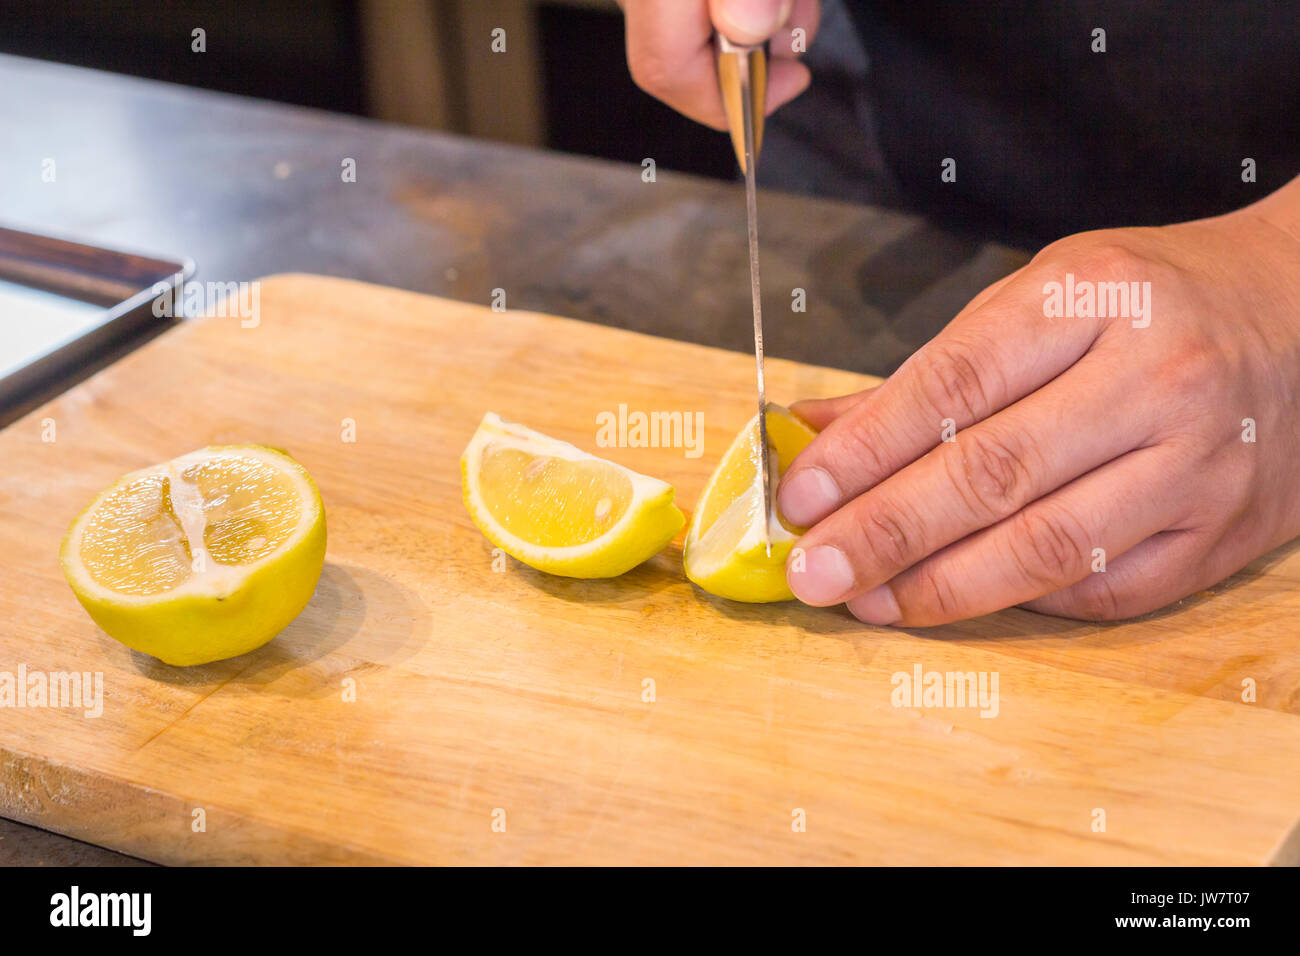 Chef slicing Lemon on wooden cutting board. Stock Photo